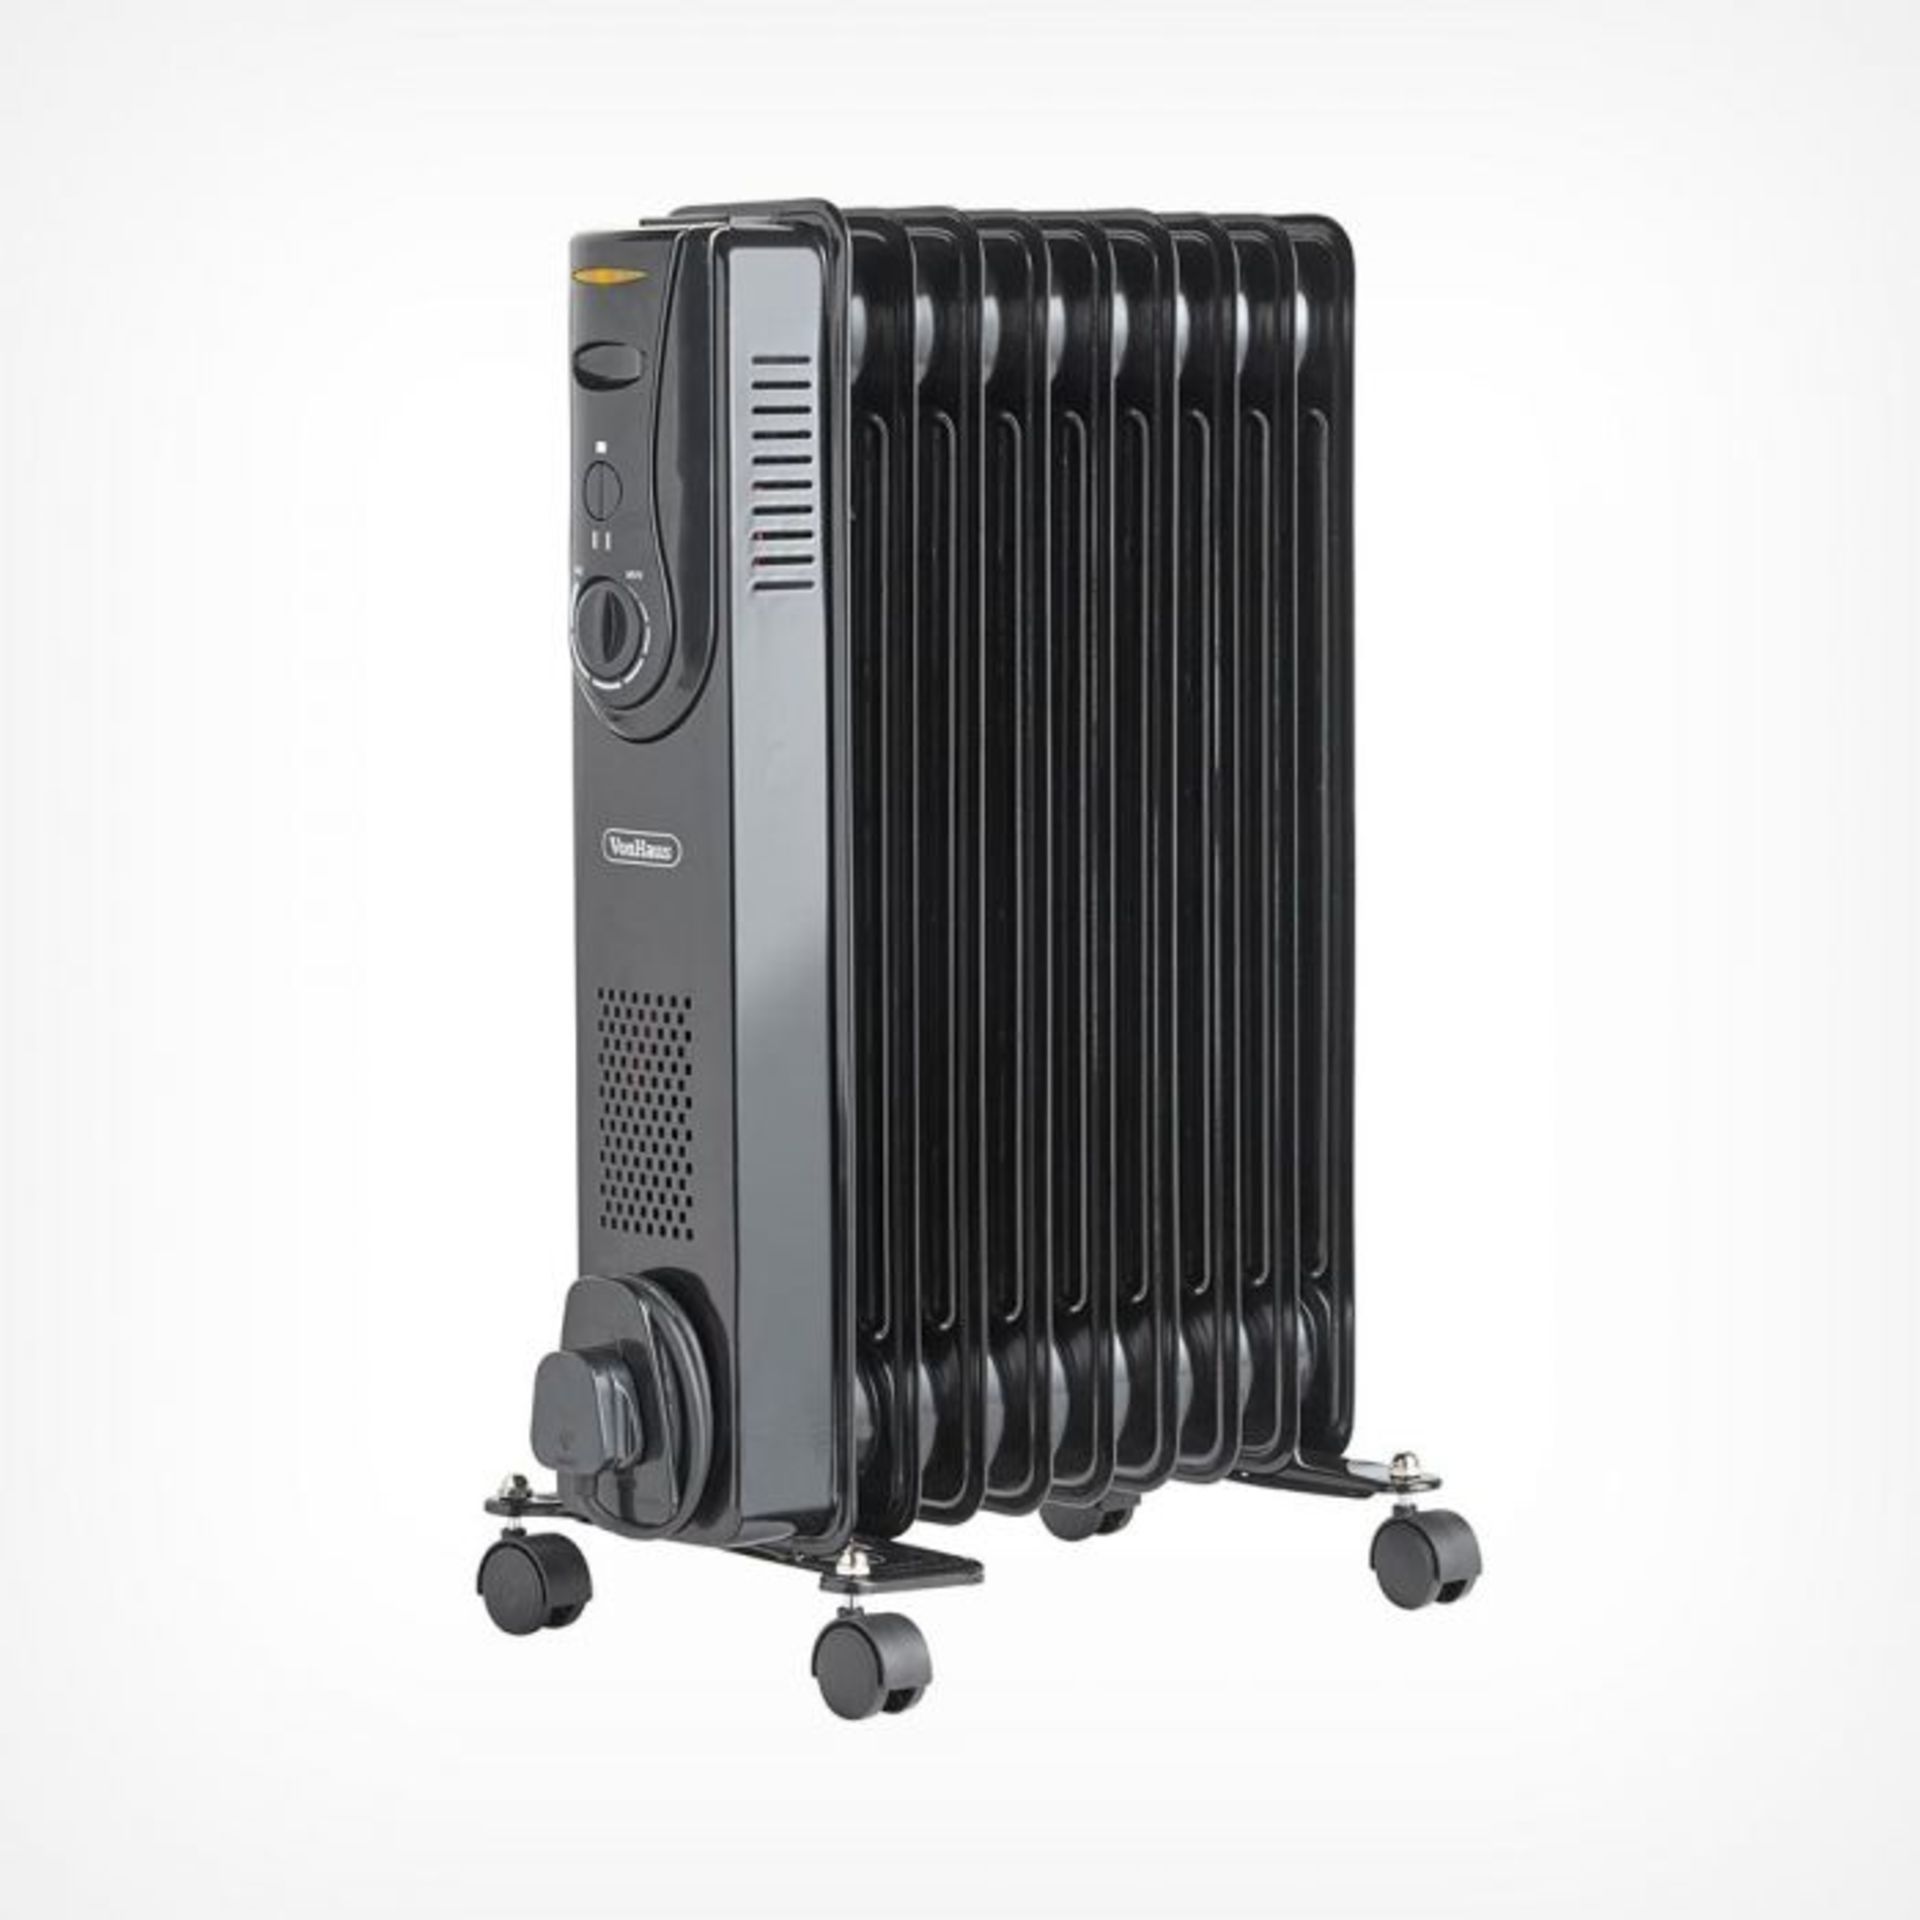 (S329) 9 Fin 2000W Oil Filled Radiator - Black Powerful 2000W radiator with 9 oil-filled fins... - Image 2 of 3